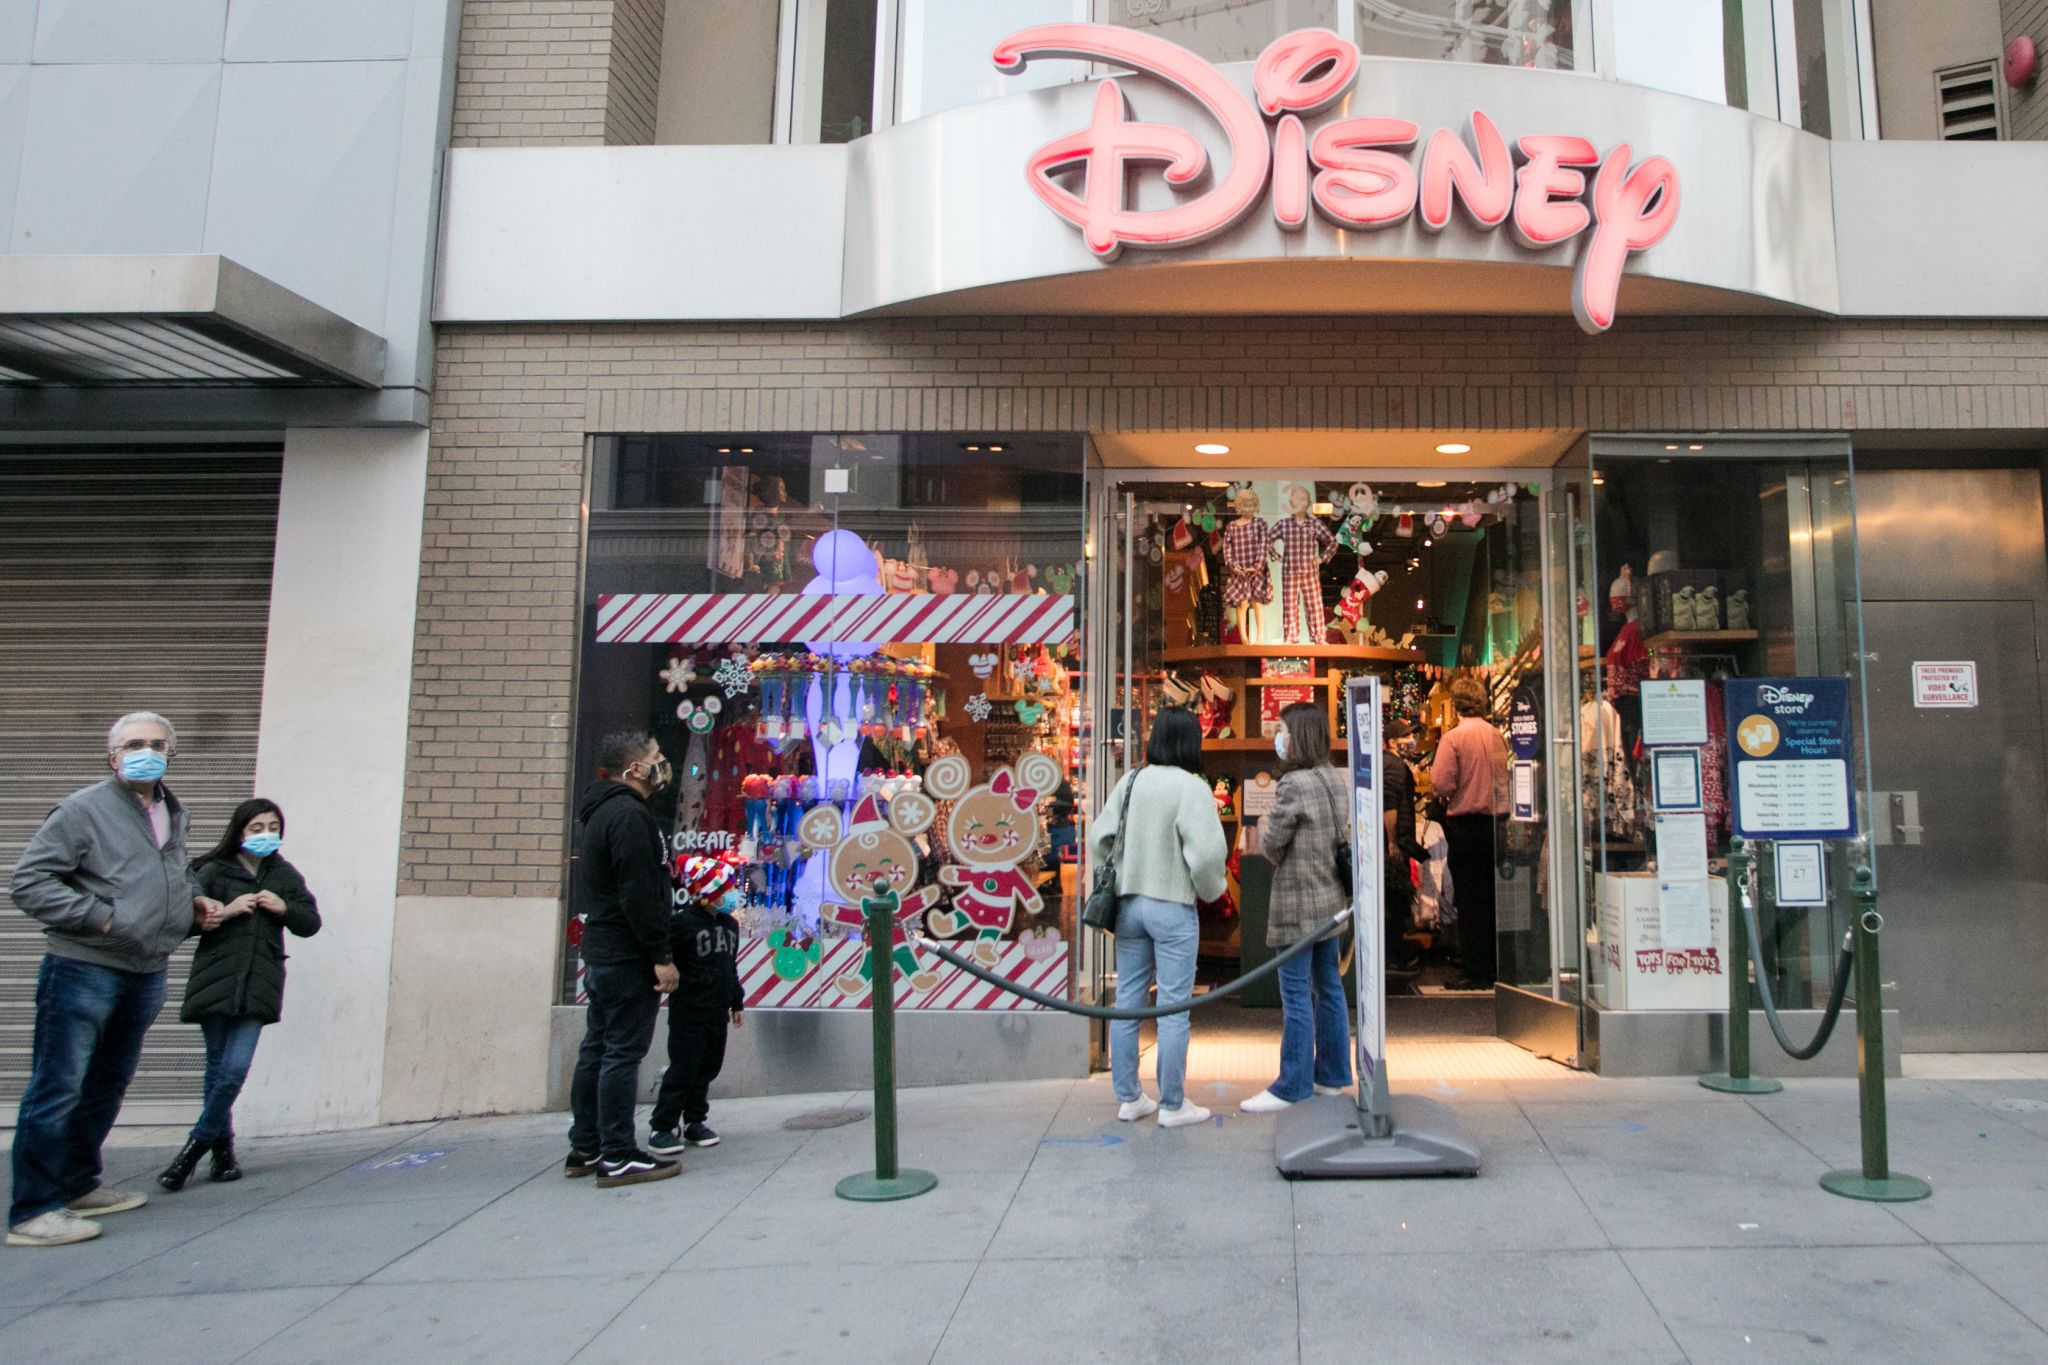 Disney Store Closing Soon In The South Bay